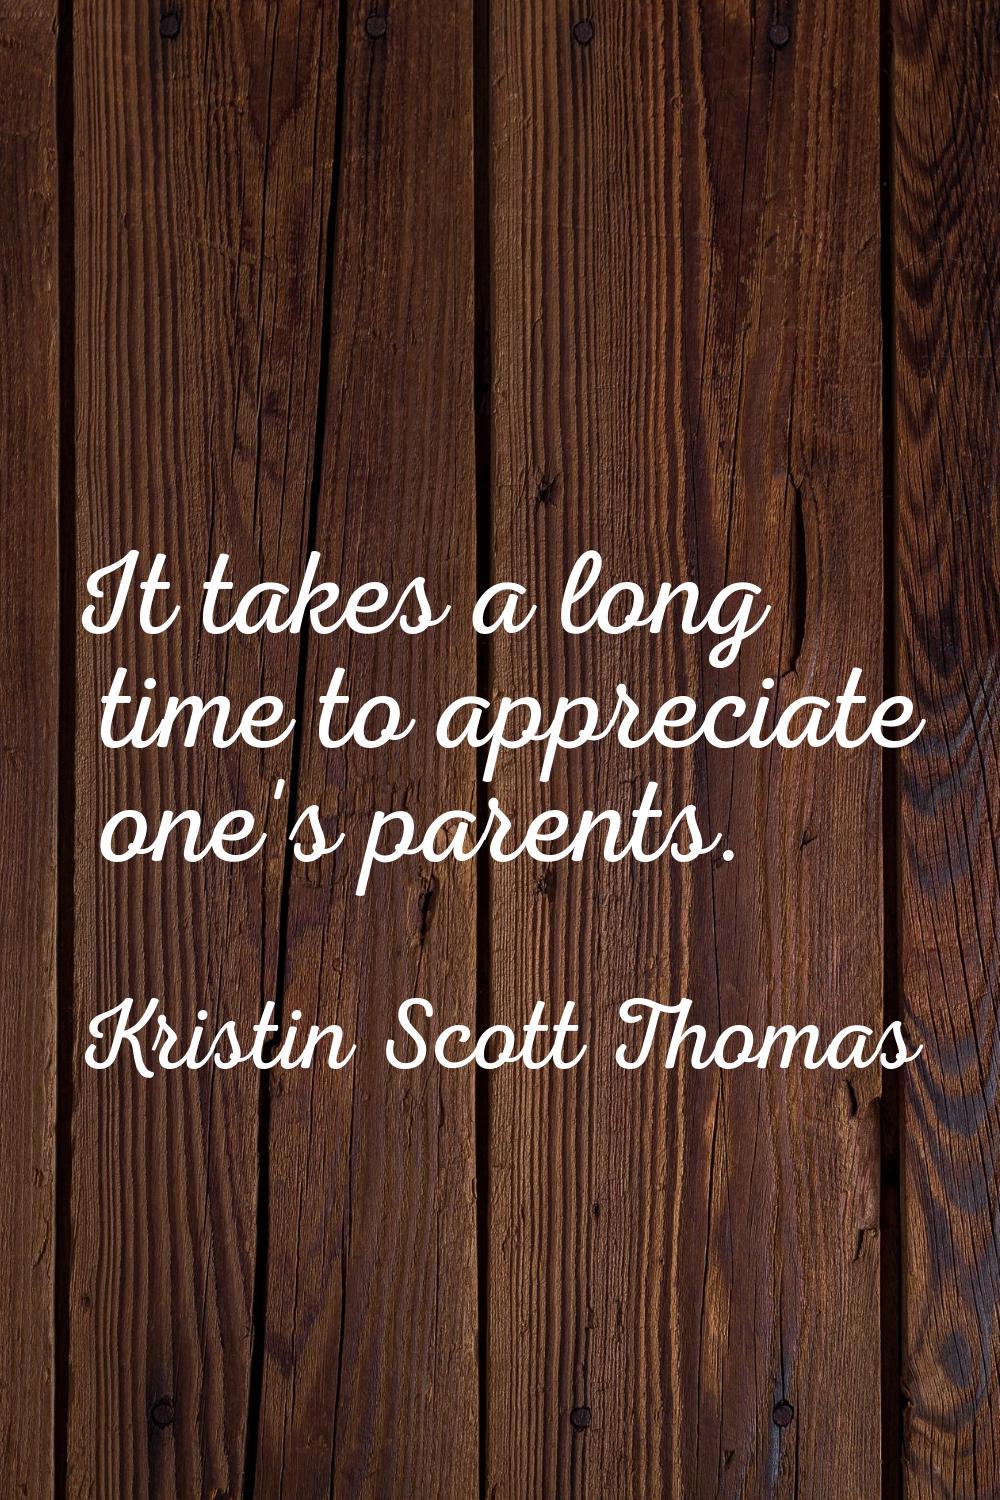 It takes a long time to appreciate one's parents.